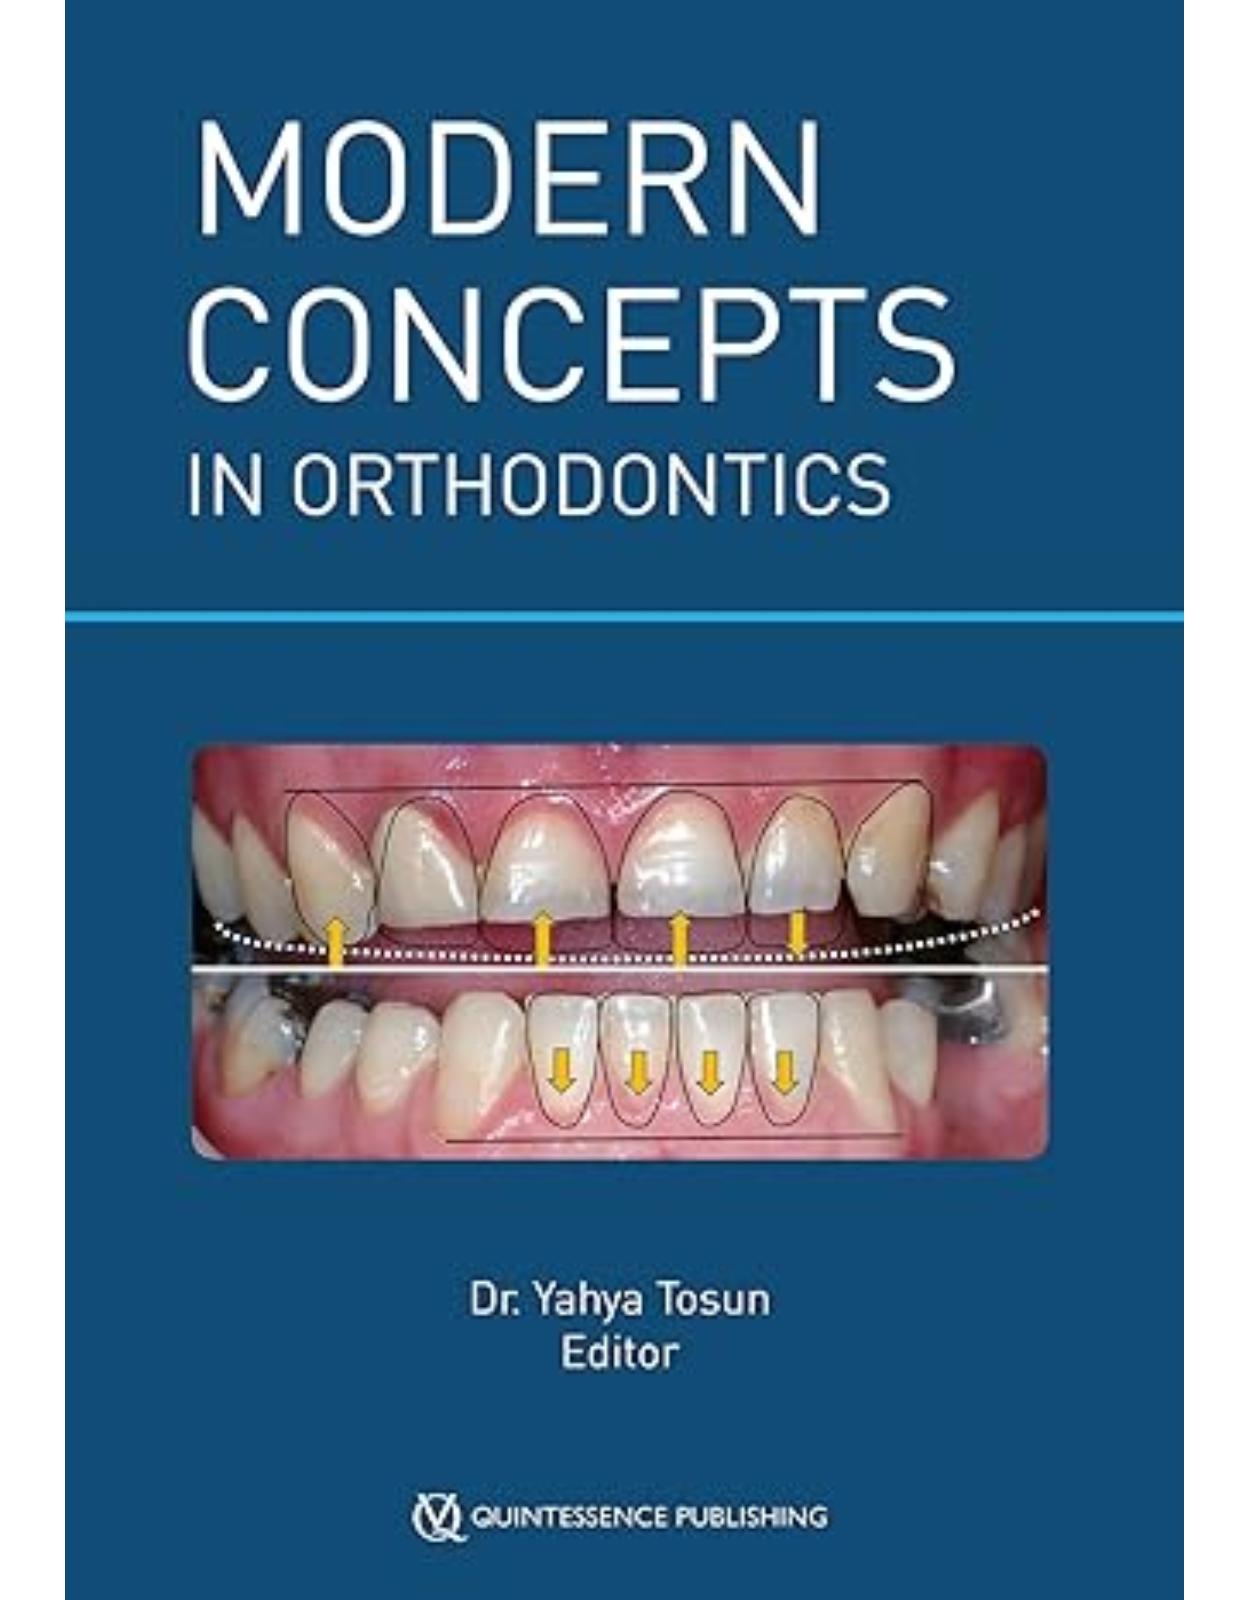 Modern Concepts in Orthodontics